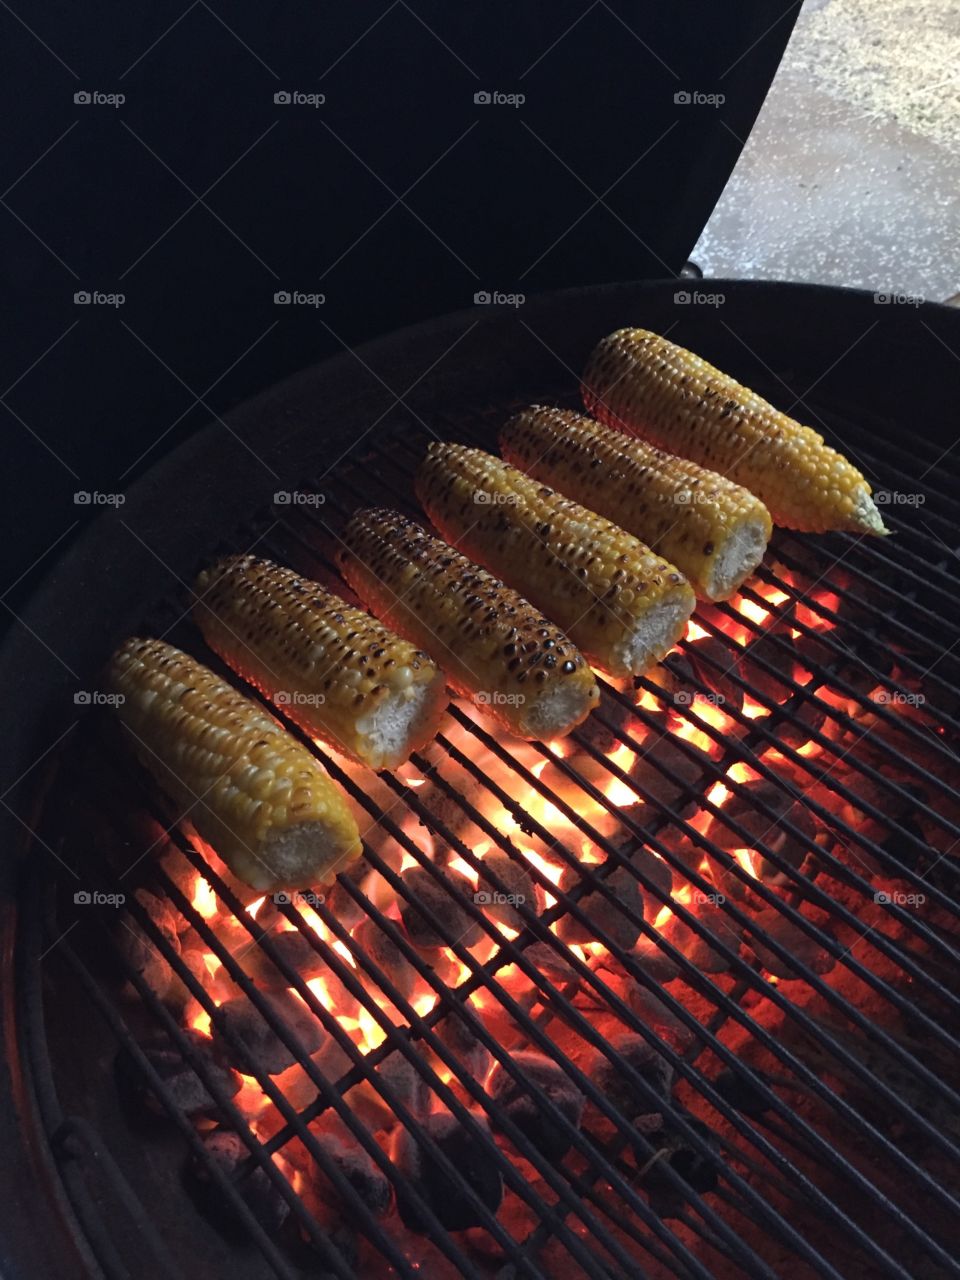 Charcoal embers with corn grilling.